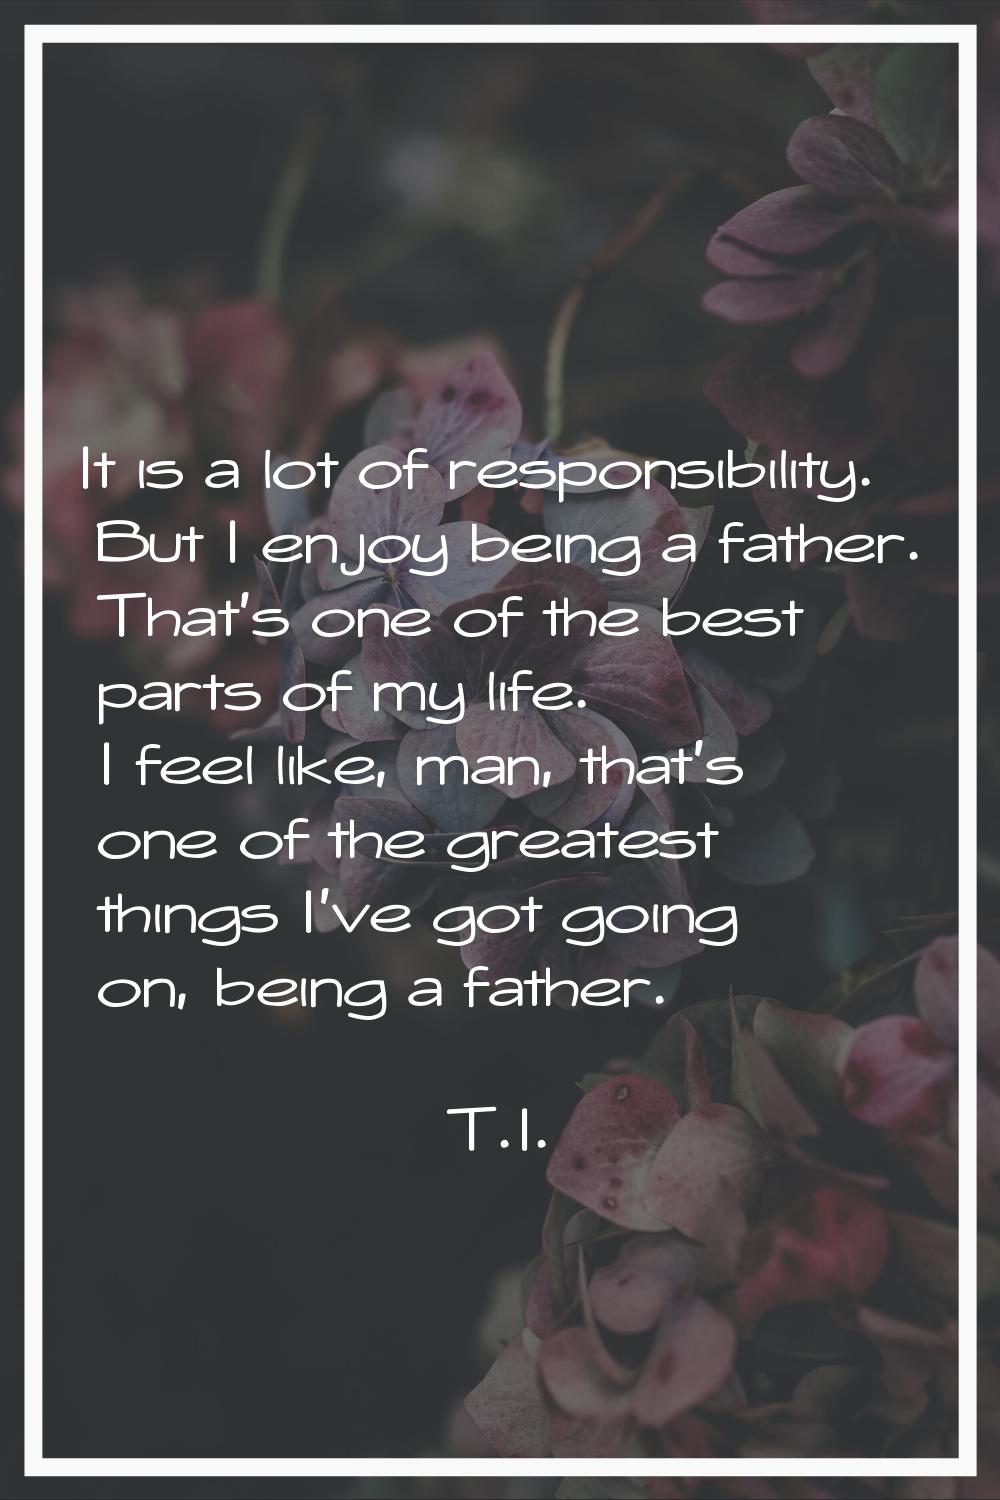 It is a lot of responsibility. But I enjoy being a father. That's one of the best parts of my life.